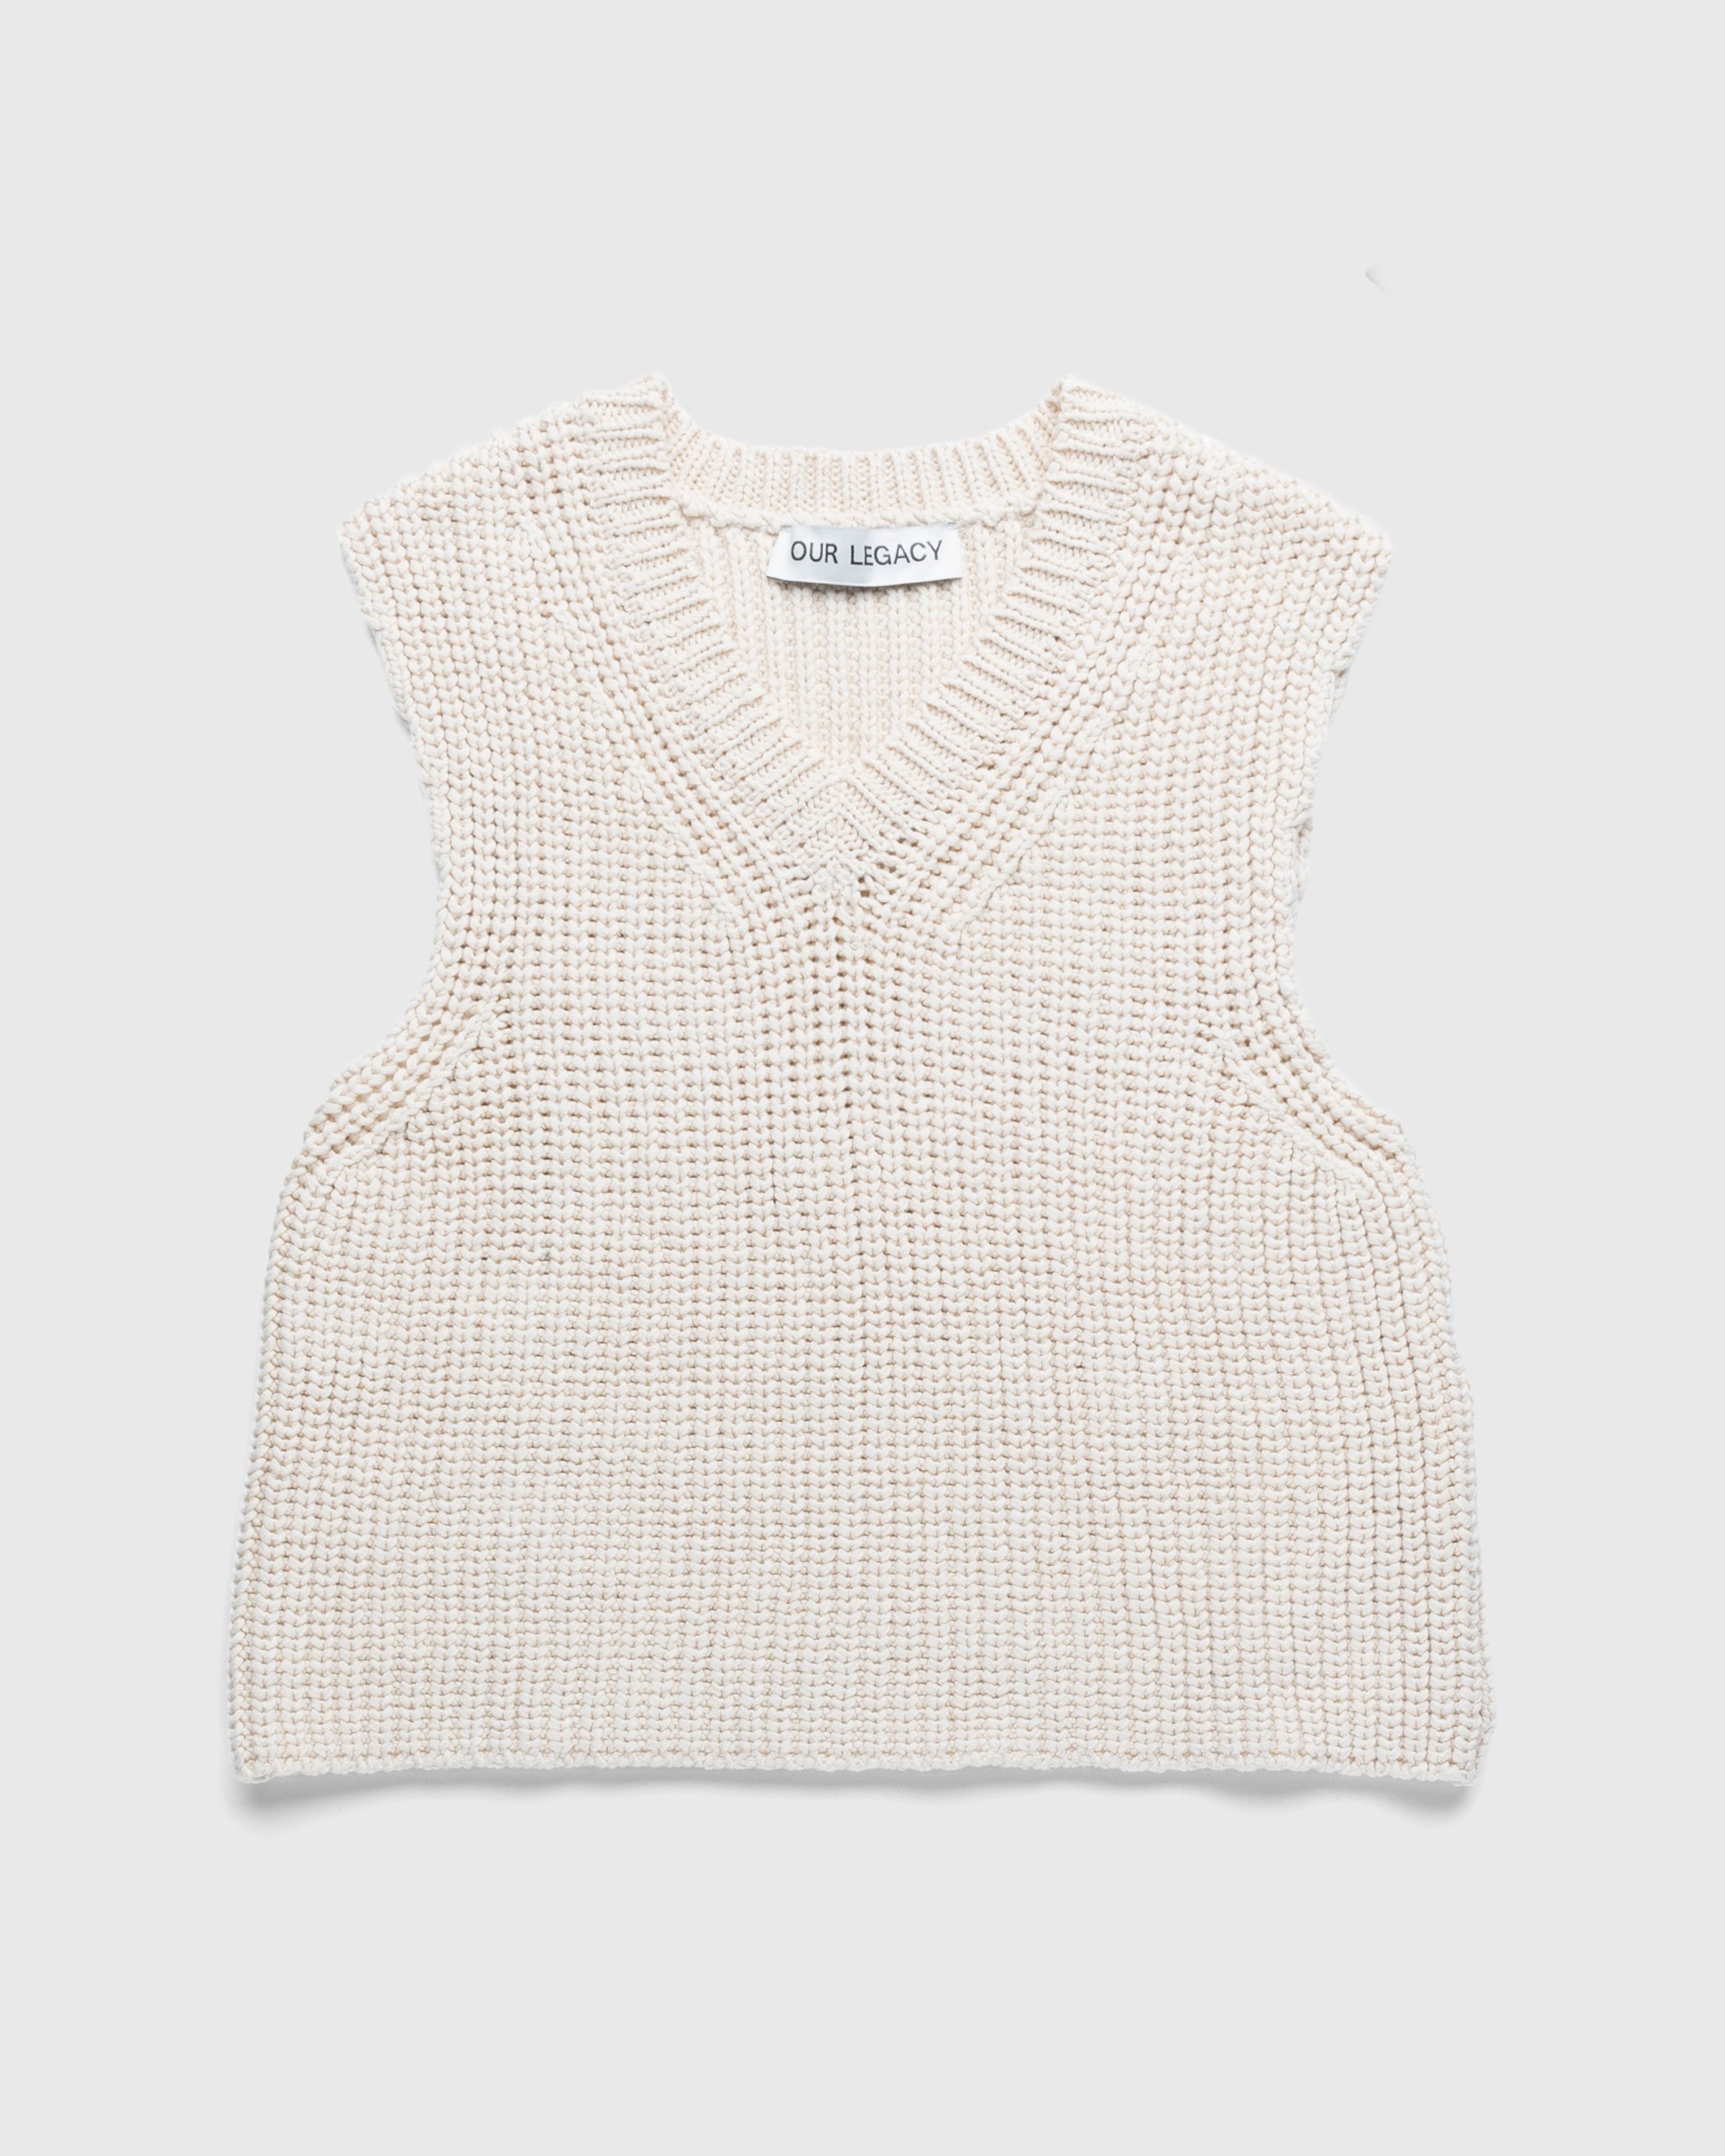 Our Legacy - Intact Vest Raw White Chunky Cotton Rib - Clothing - White - Image 1